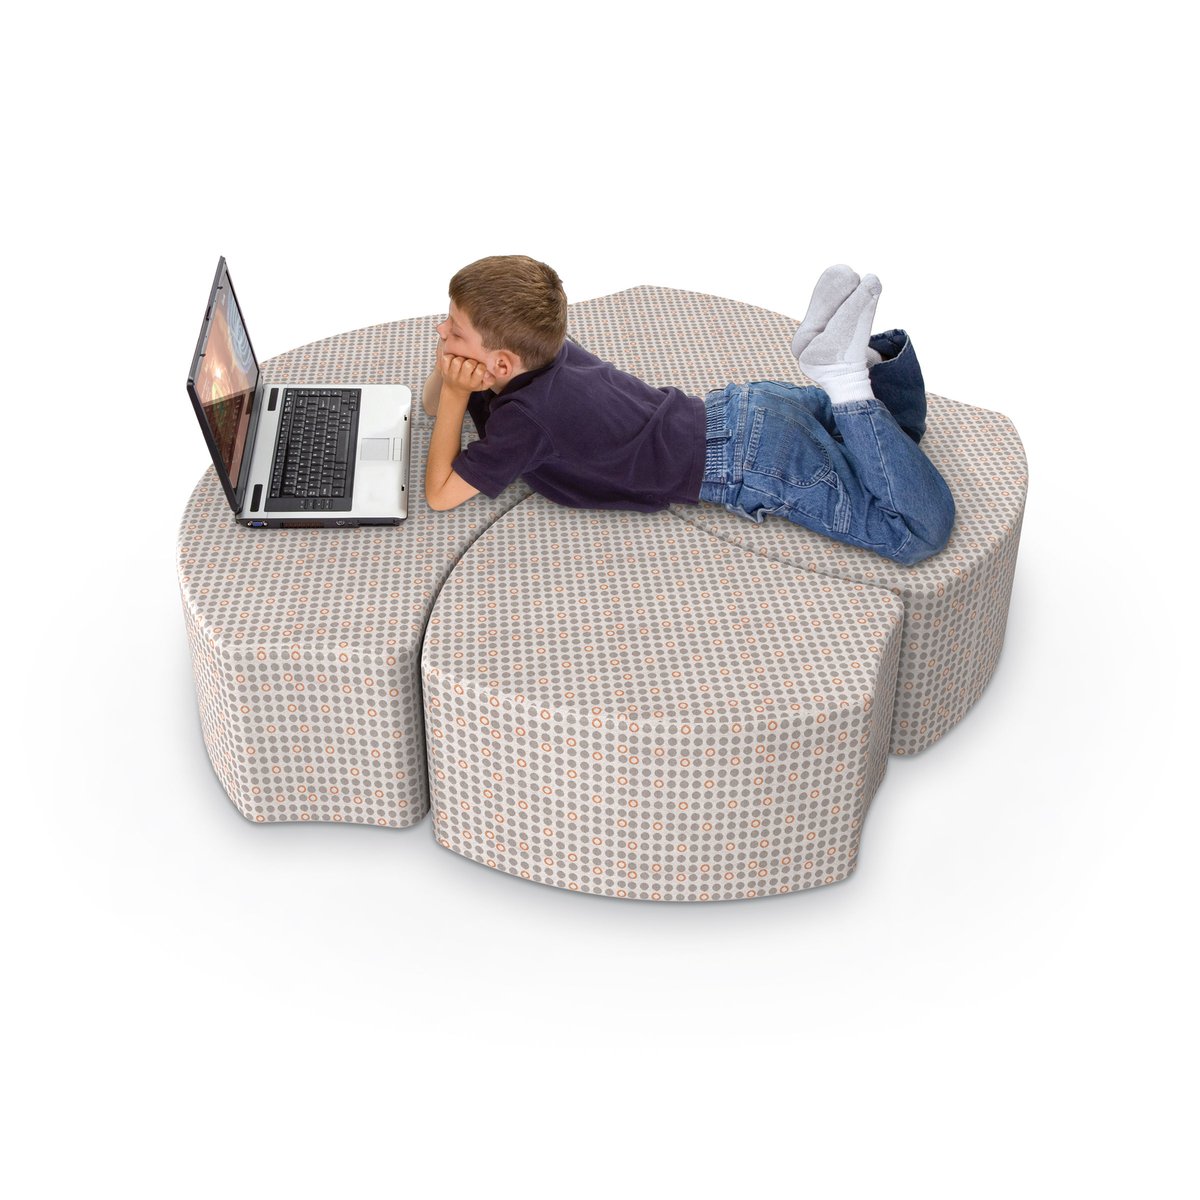 MooreCo soft seating